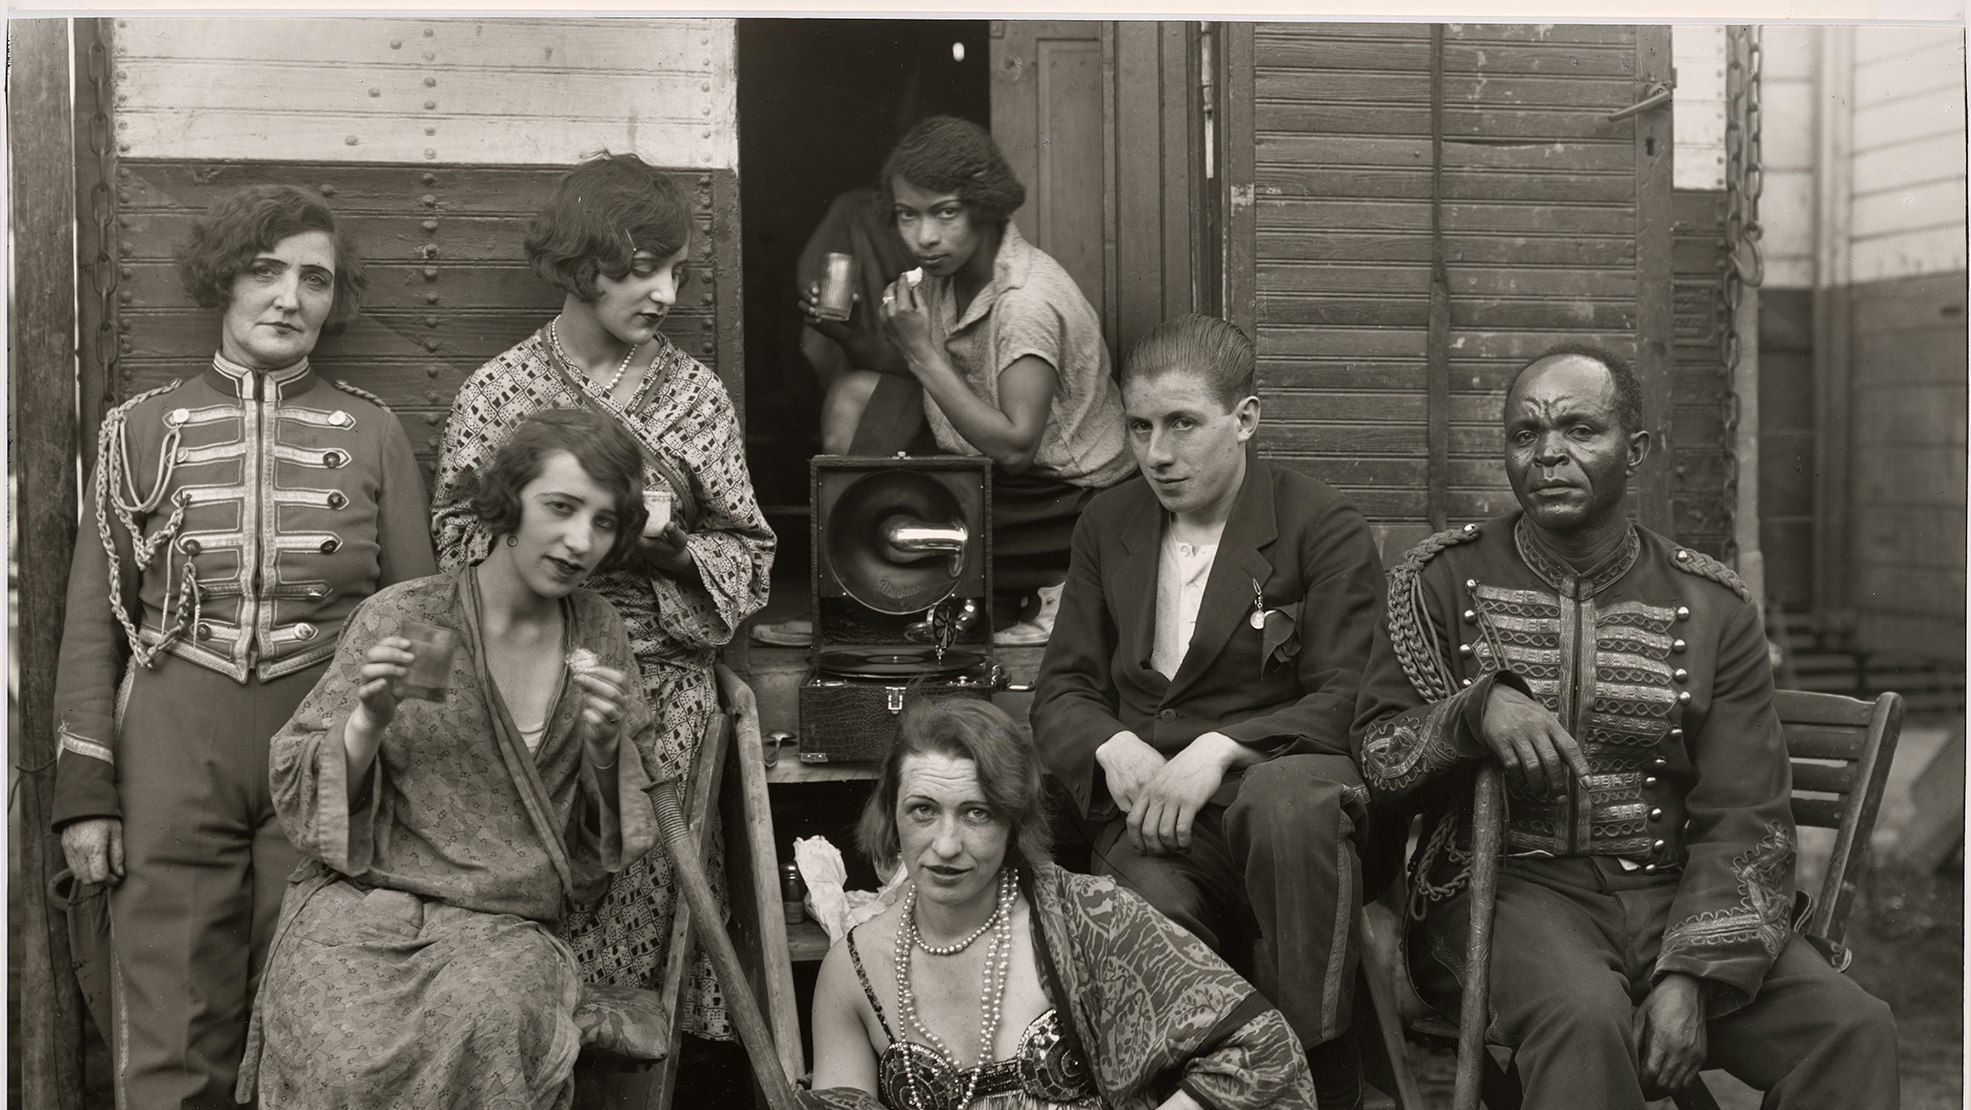 August Sander Takes His Camera to the Circus